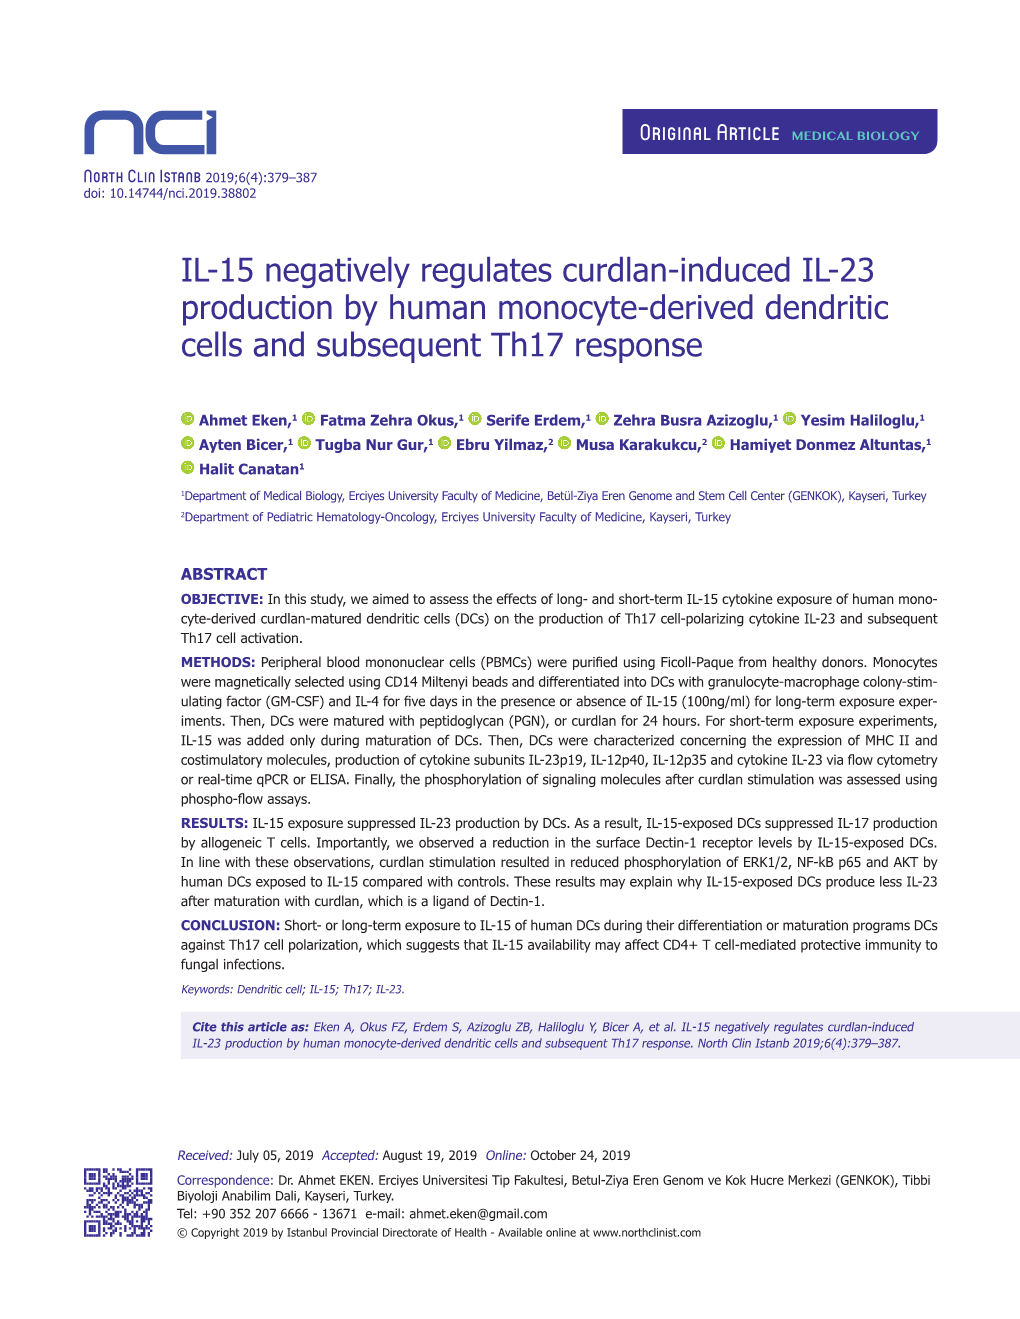 IL-15 Negatively Regulates Curdlan-Induced IL-23 Production by Human Monocyte-Derived Dendritic Cells and Subsequent Th17 Response